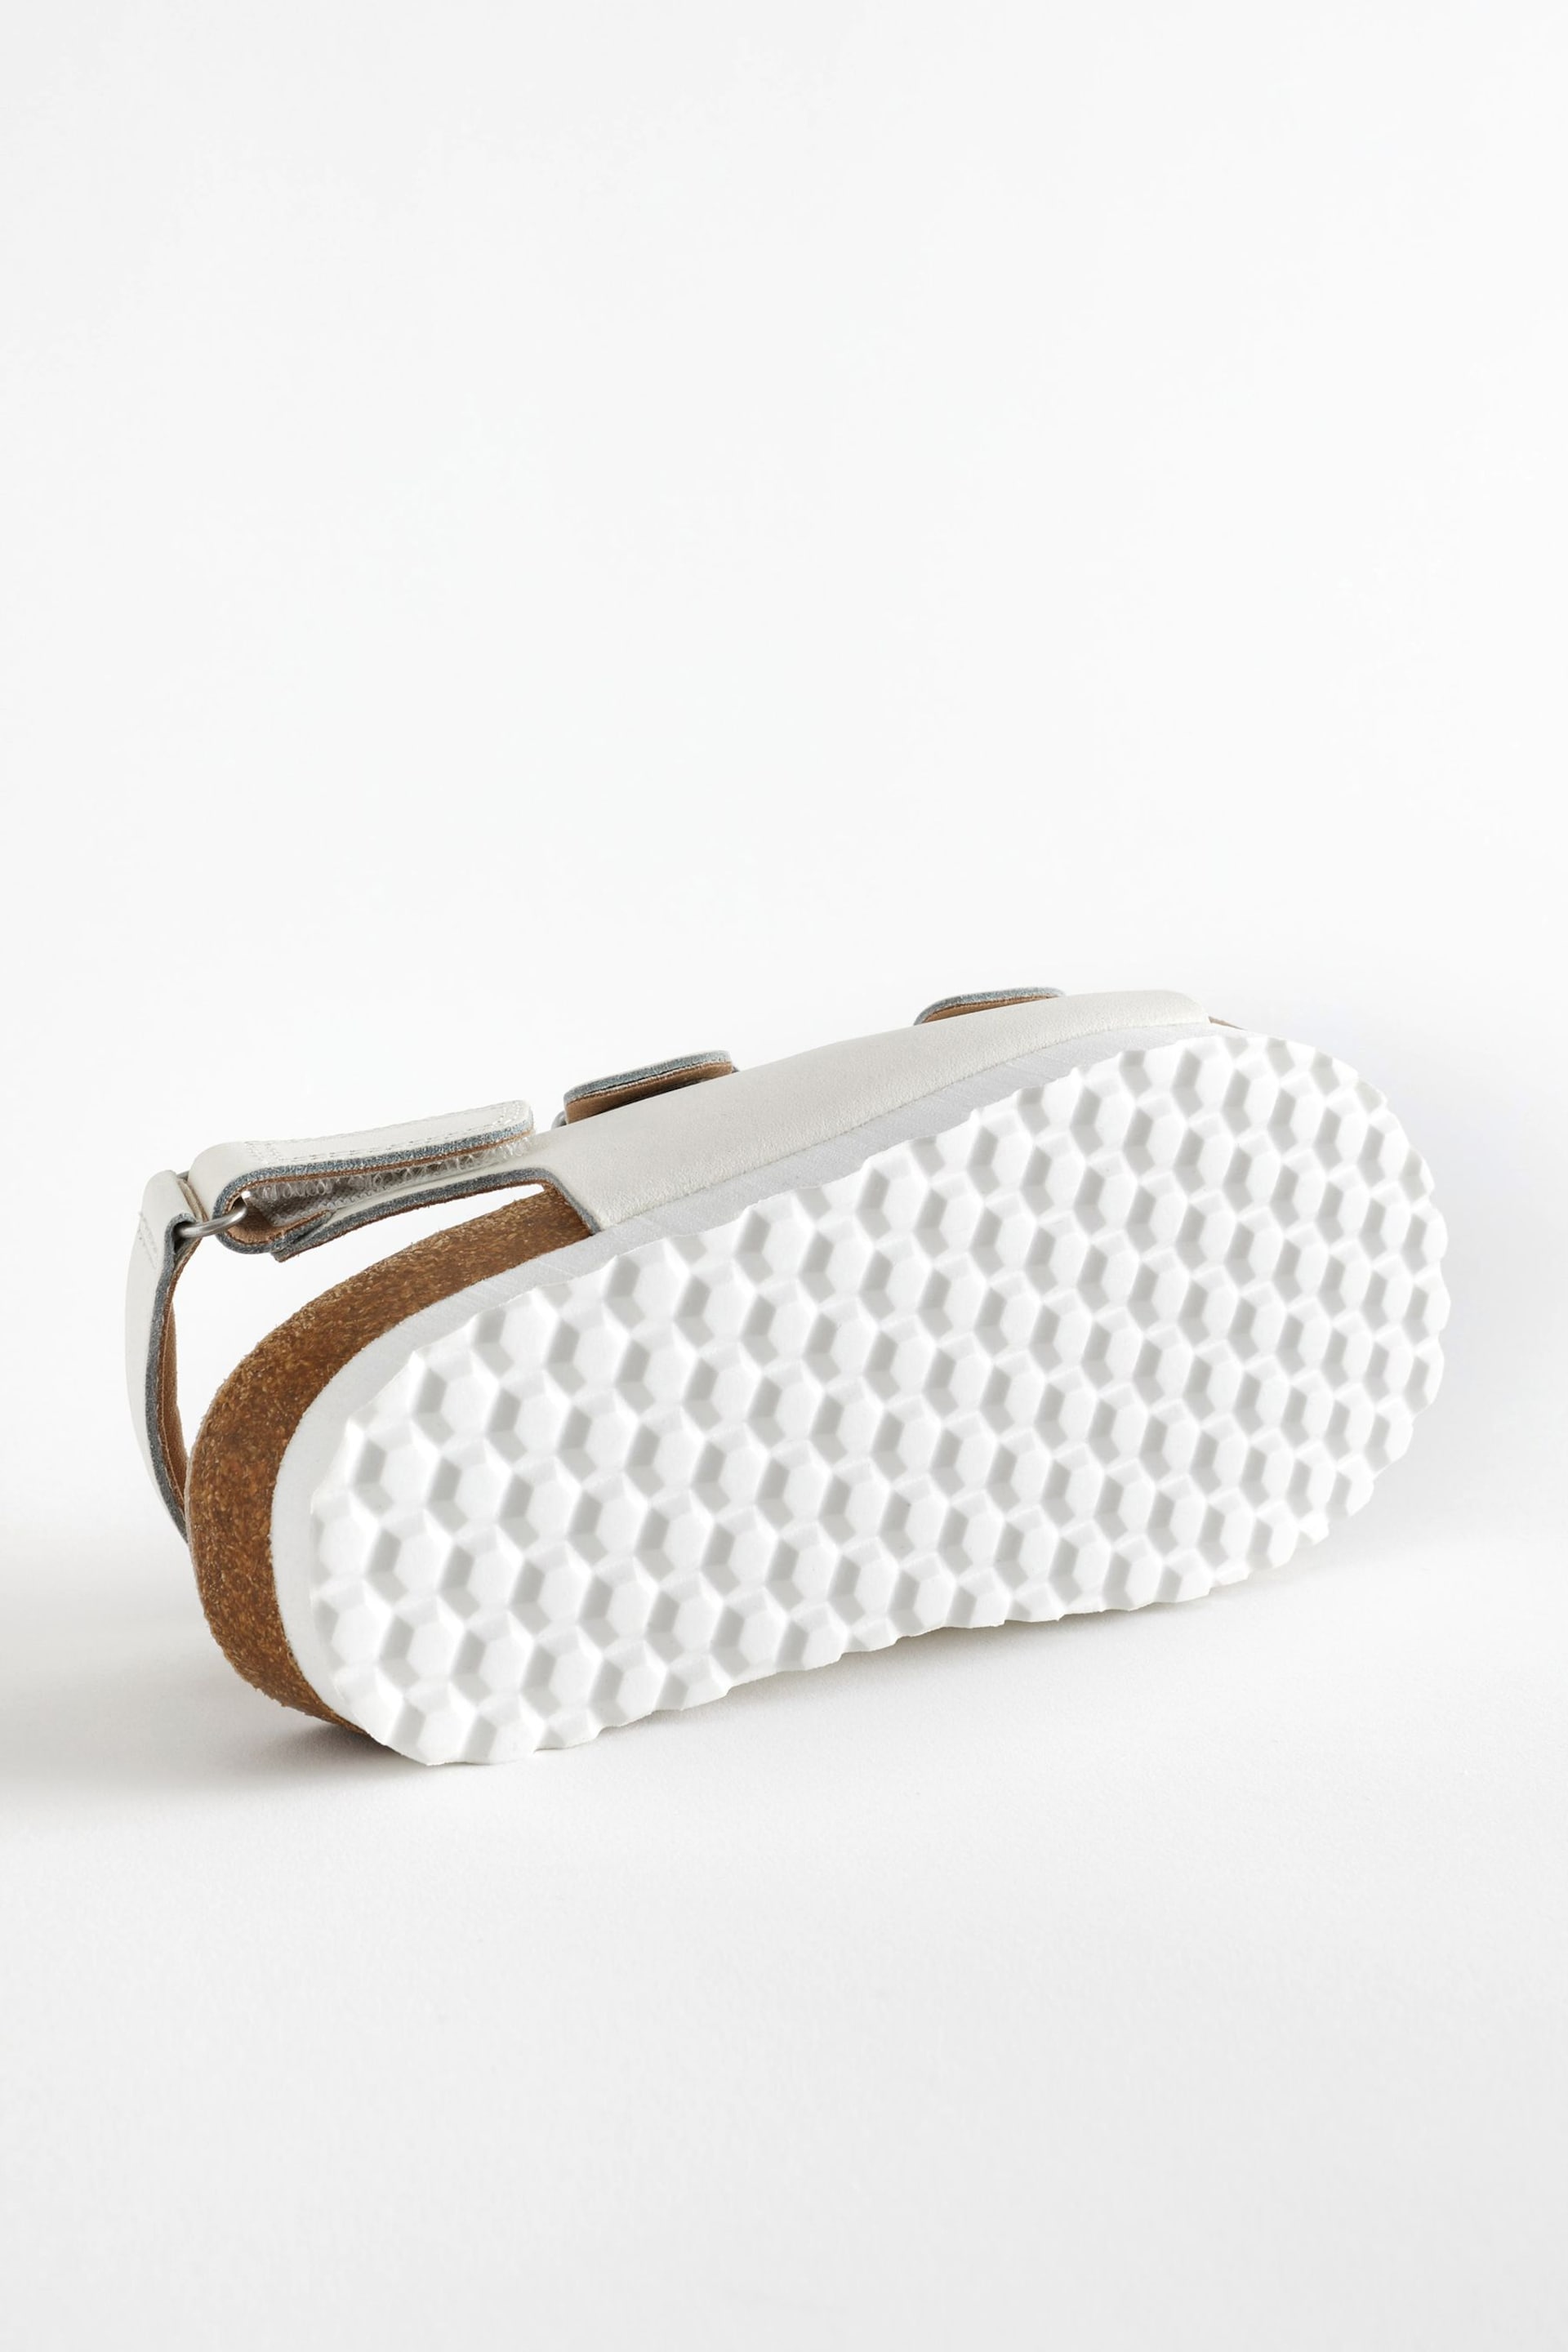 White Leather Standard Fit (F) Two Strap Corkbed Sandals - Image 6 of 9